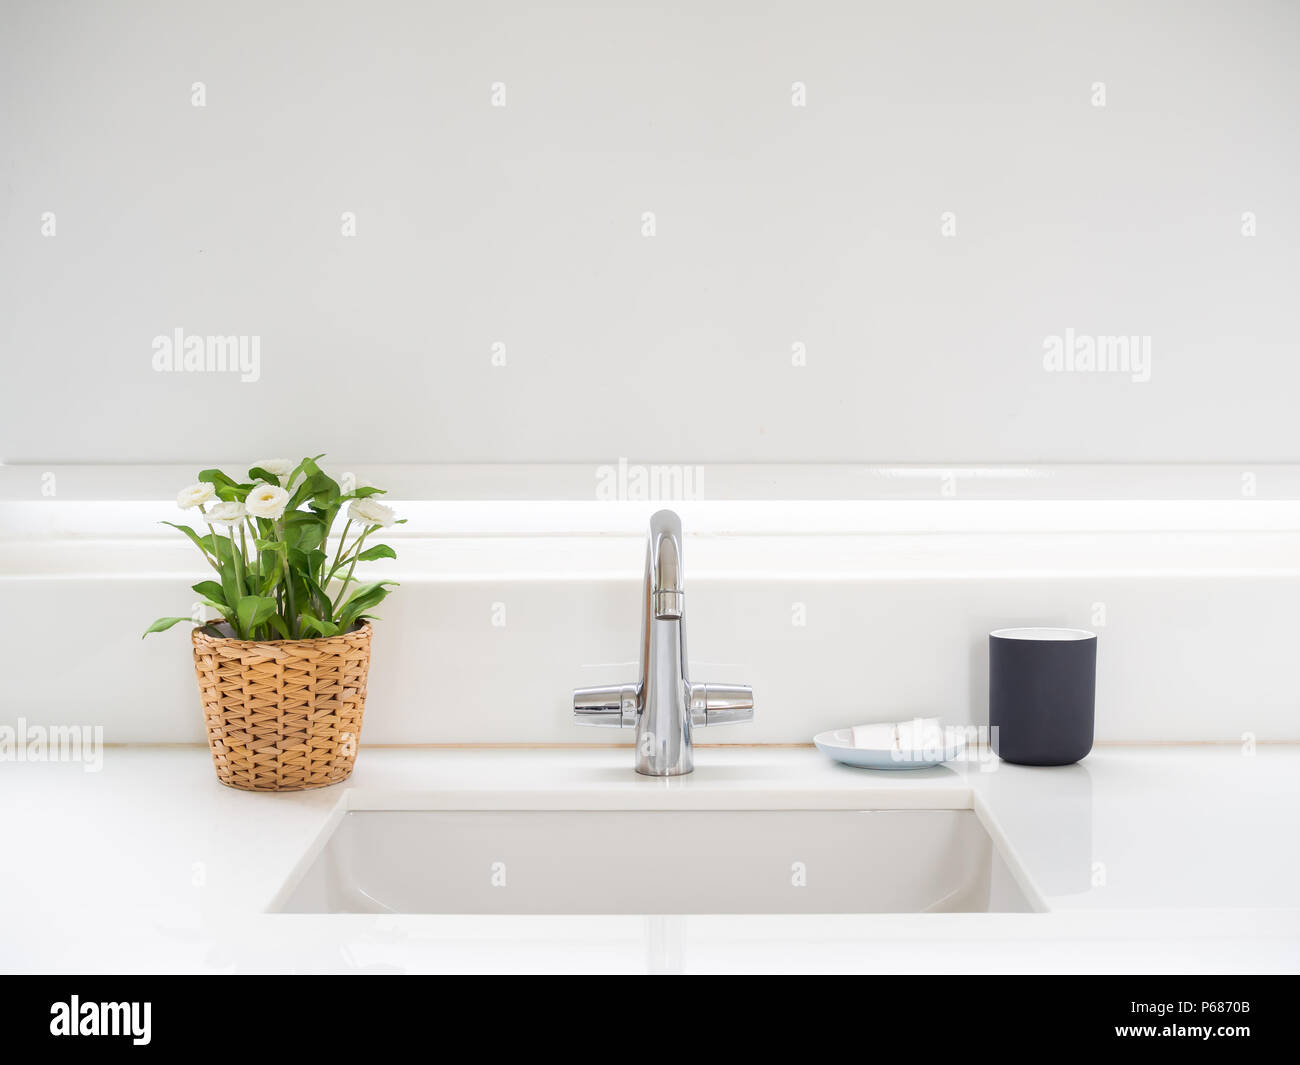 Clean White Bathroom Interior With Sink Basin Faucet Flower